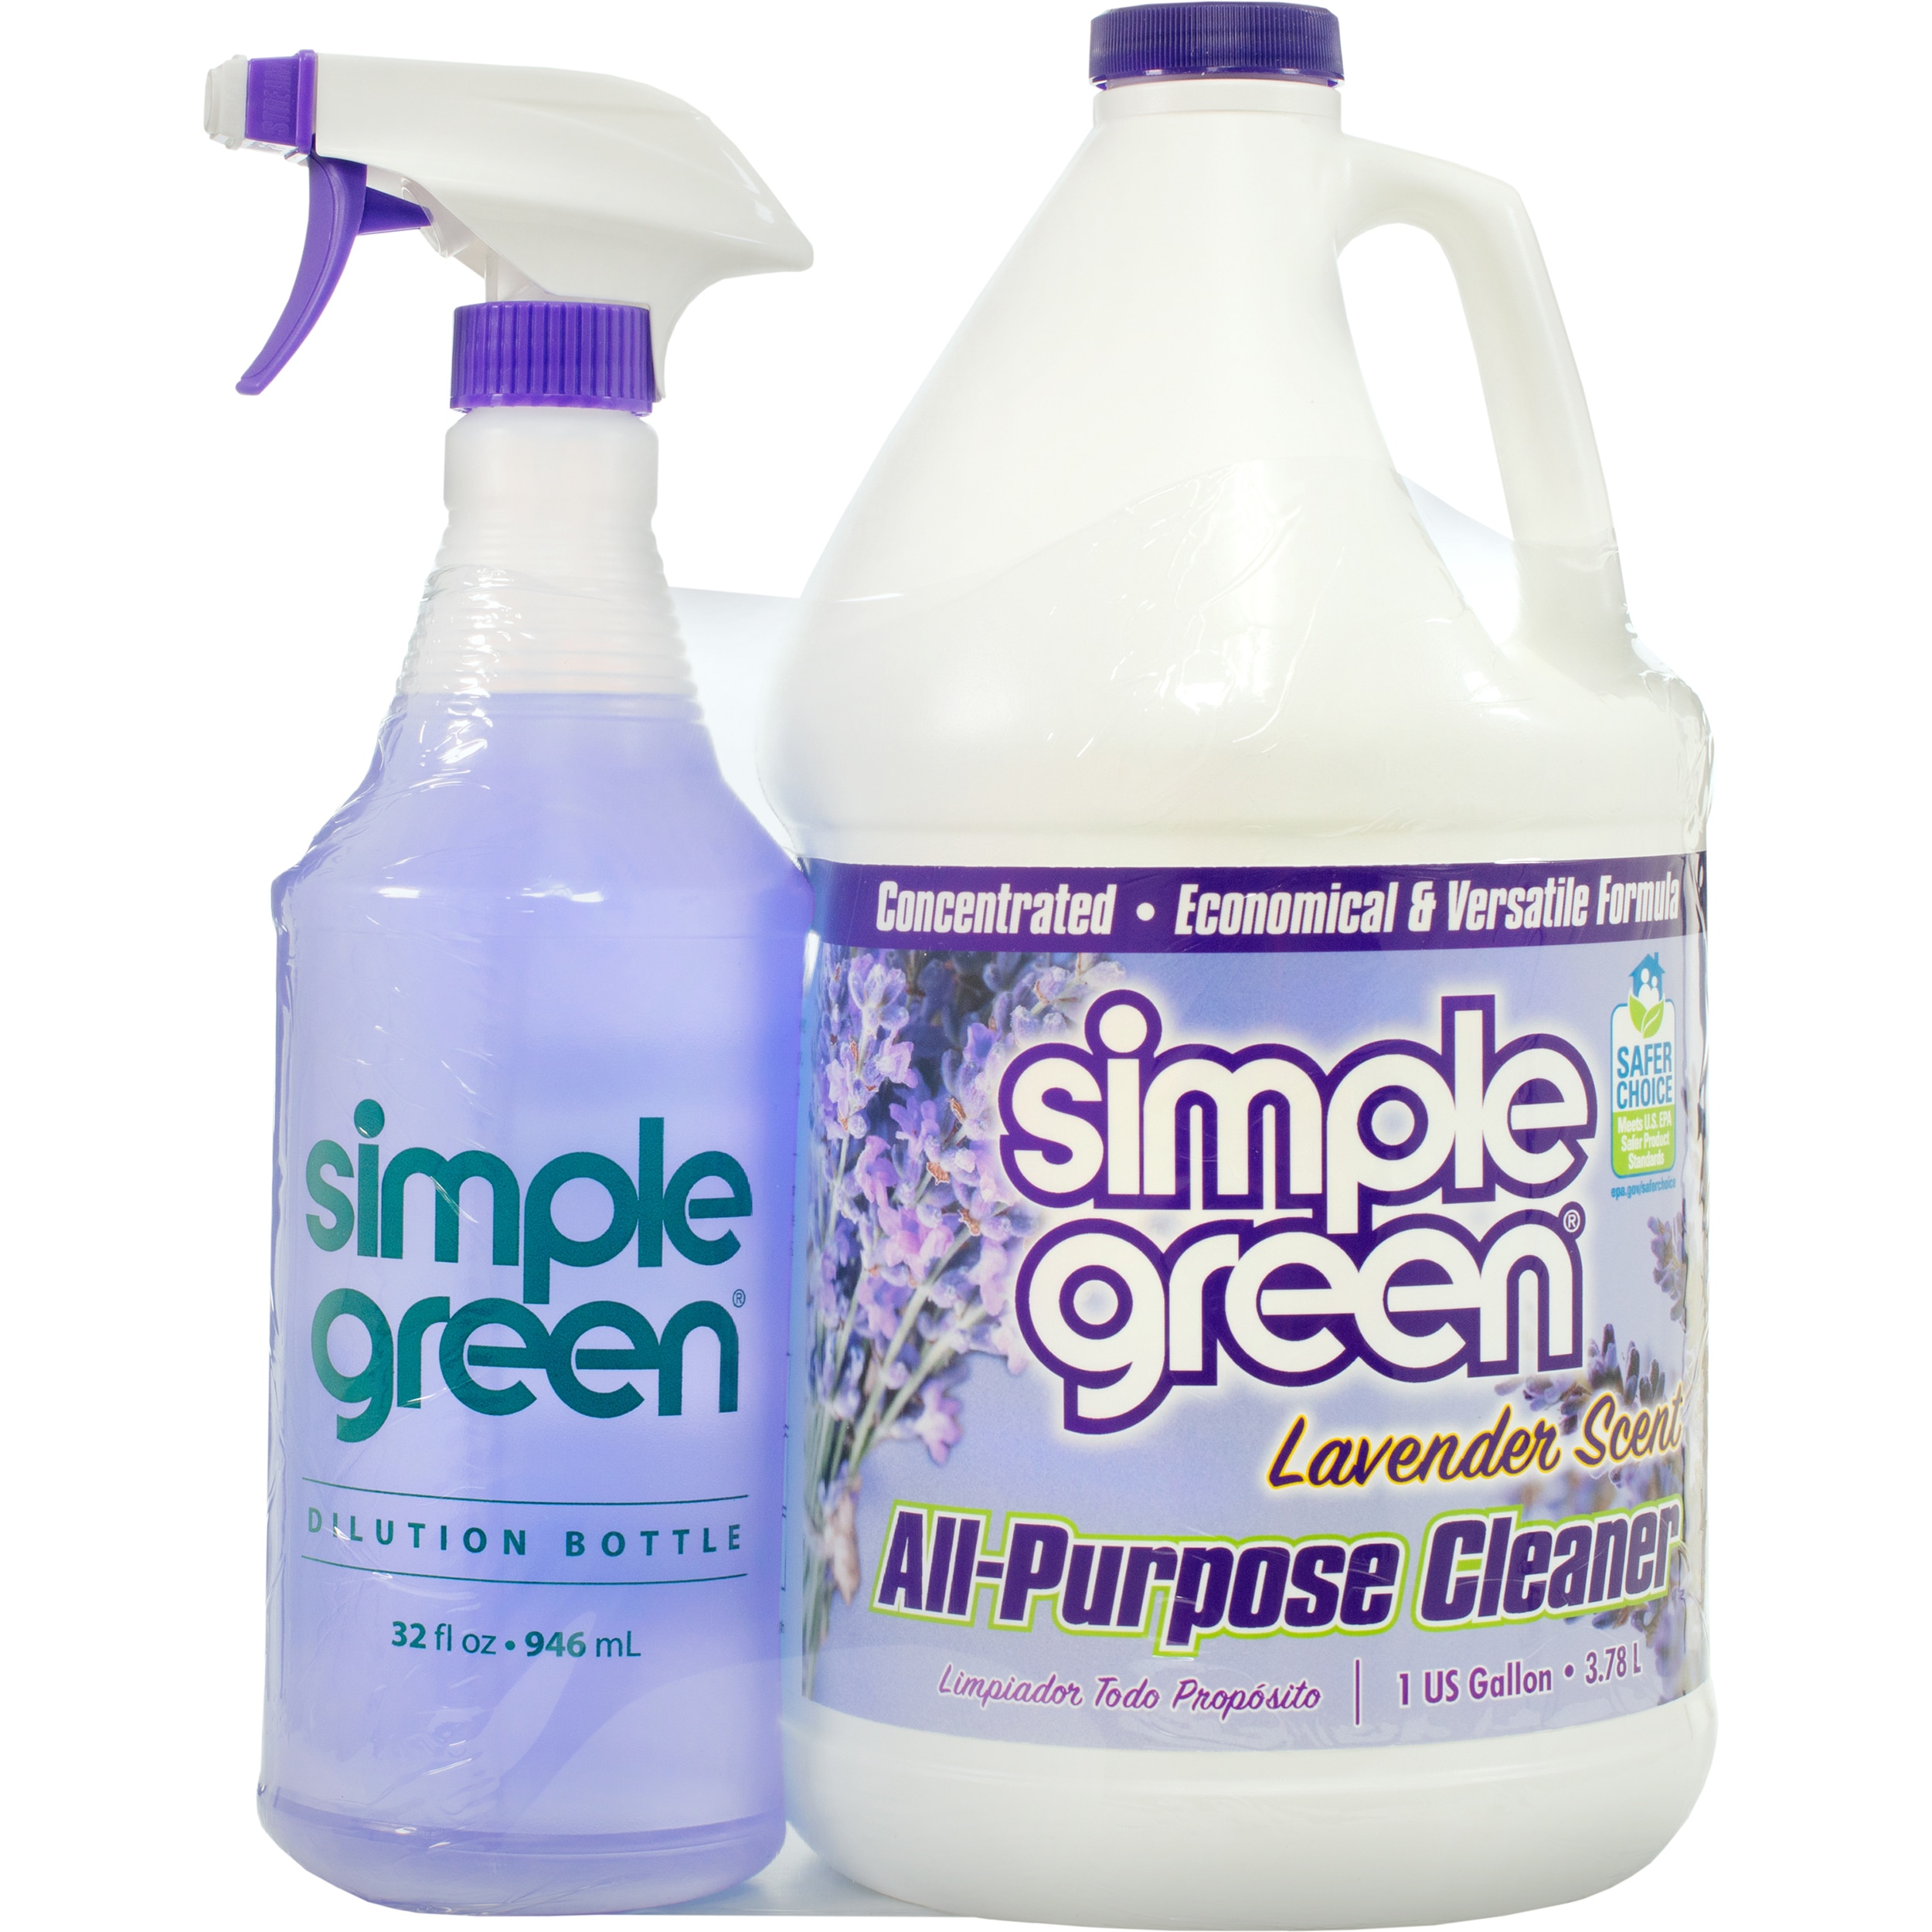 Reviews for Simple Green 67.6 oz. Concentrated All-Purpose Cleaner